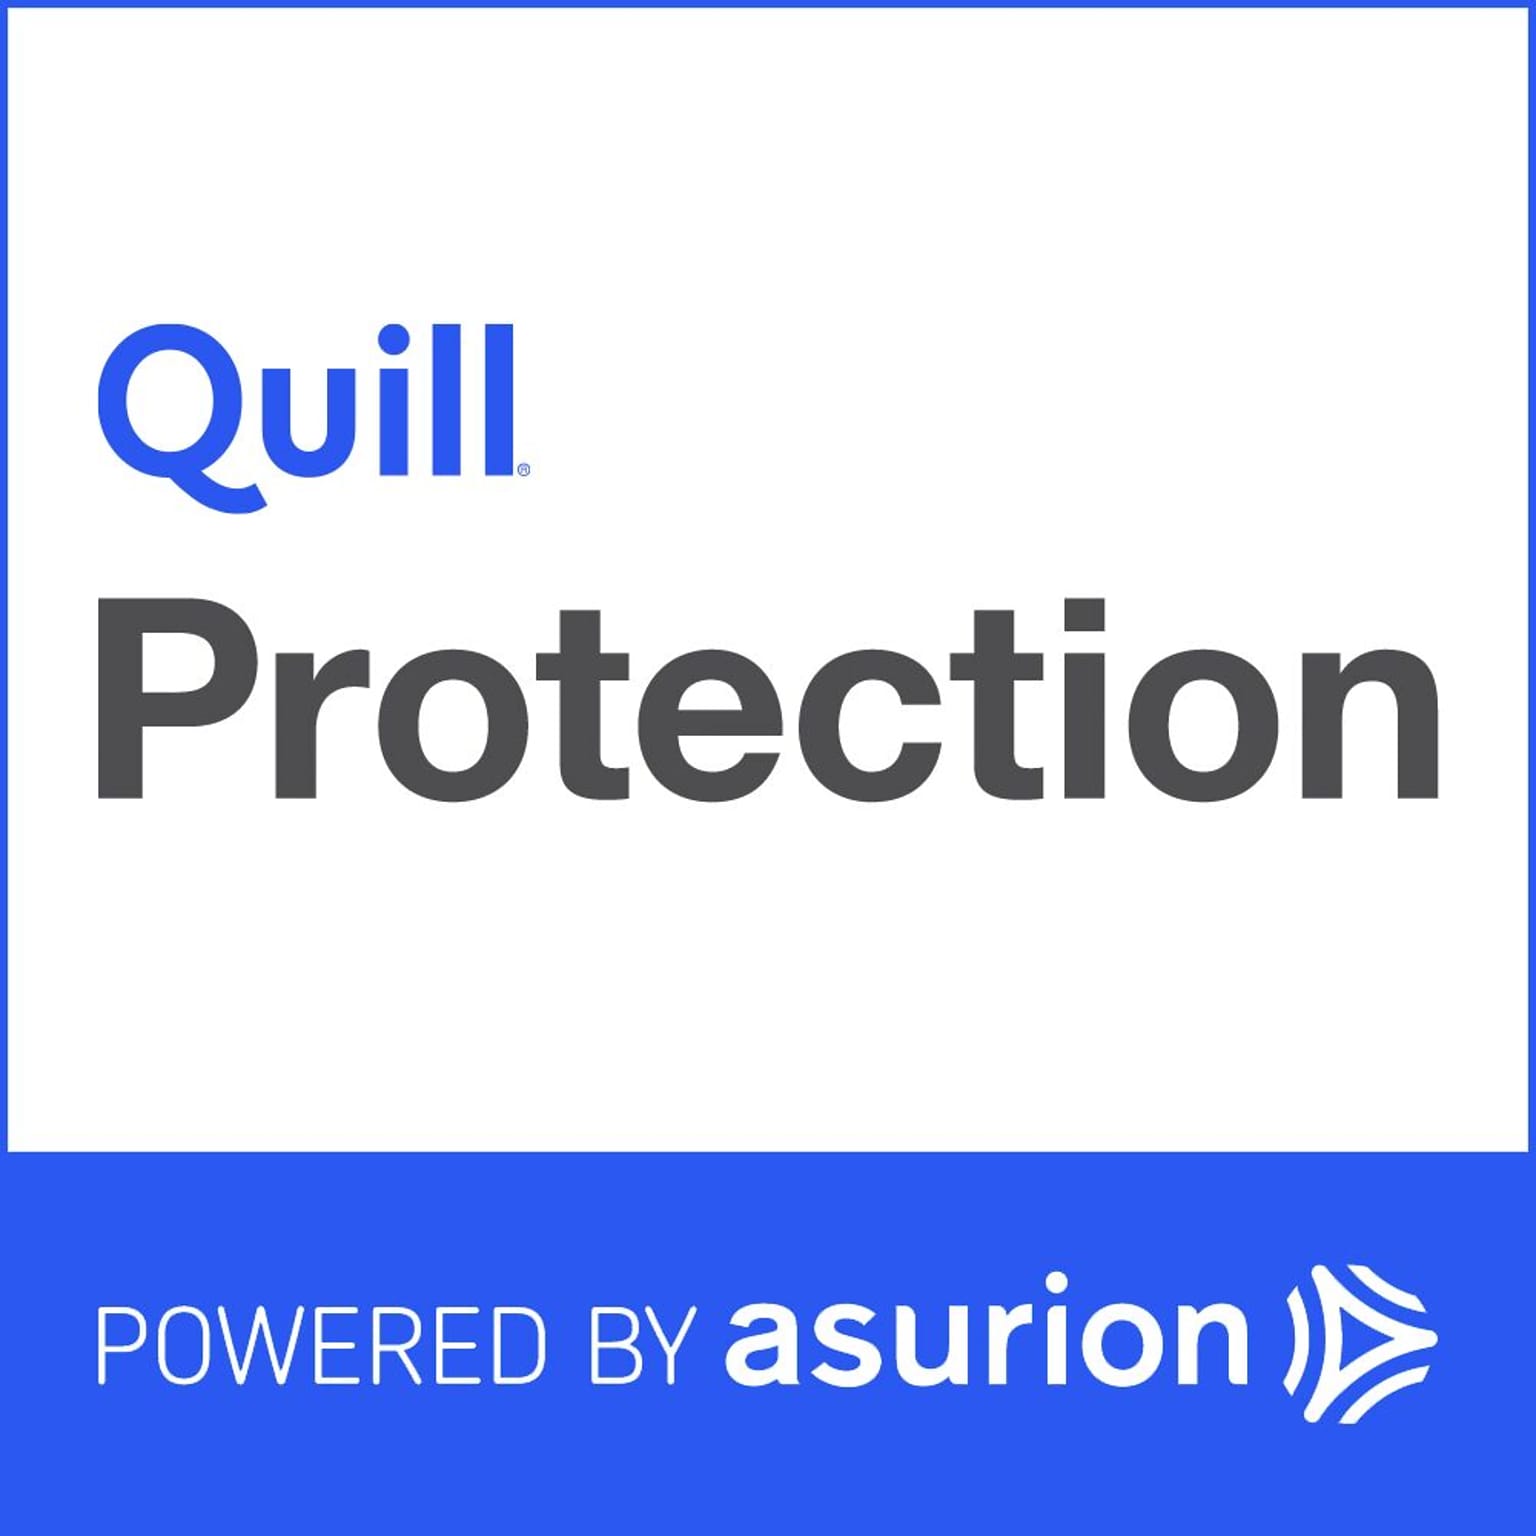 Quill.com 3 Year Protection Plan $60-$99.99